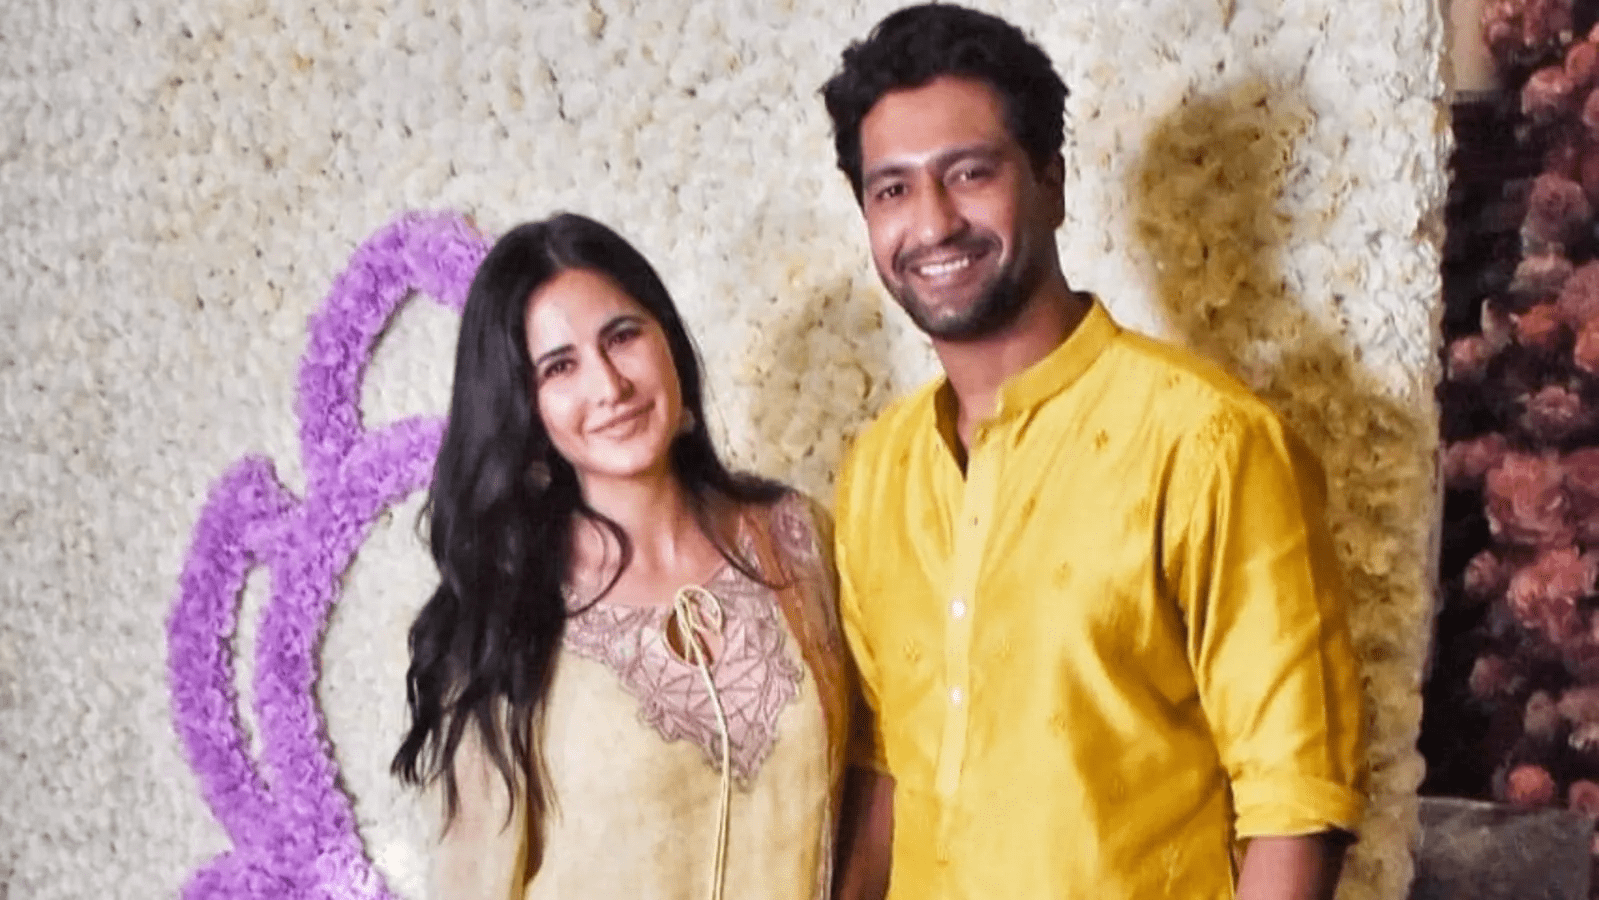 Vicky talks about some good quality of wife Katrina